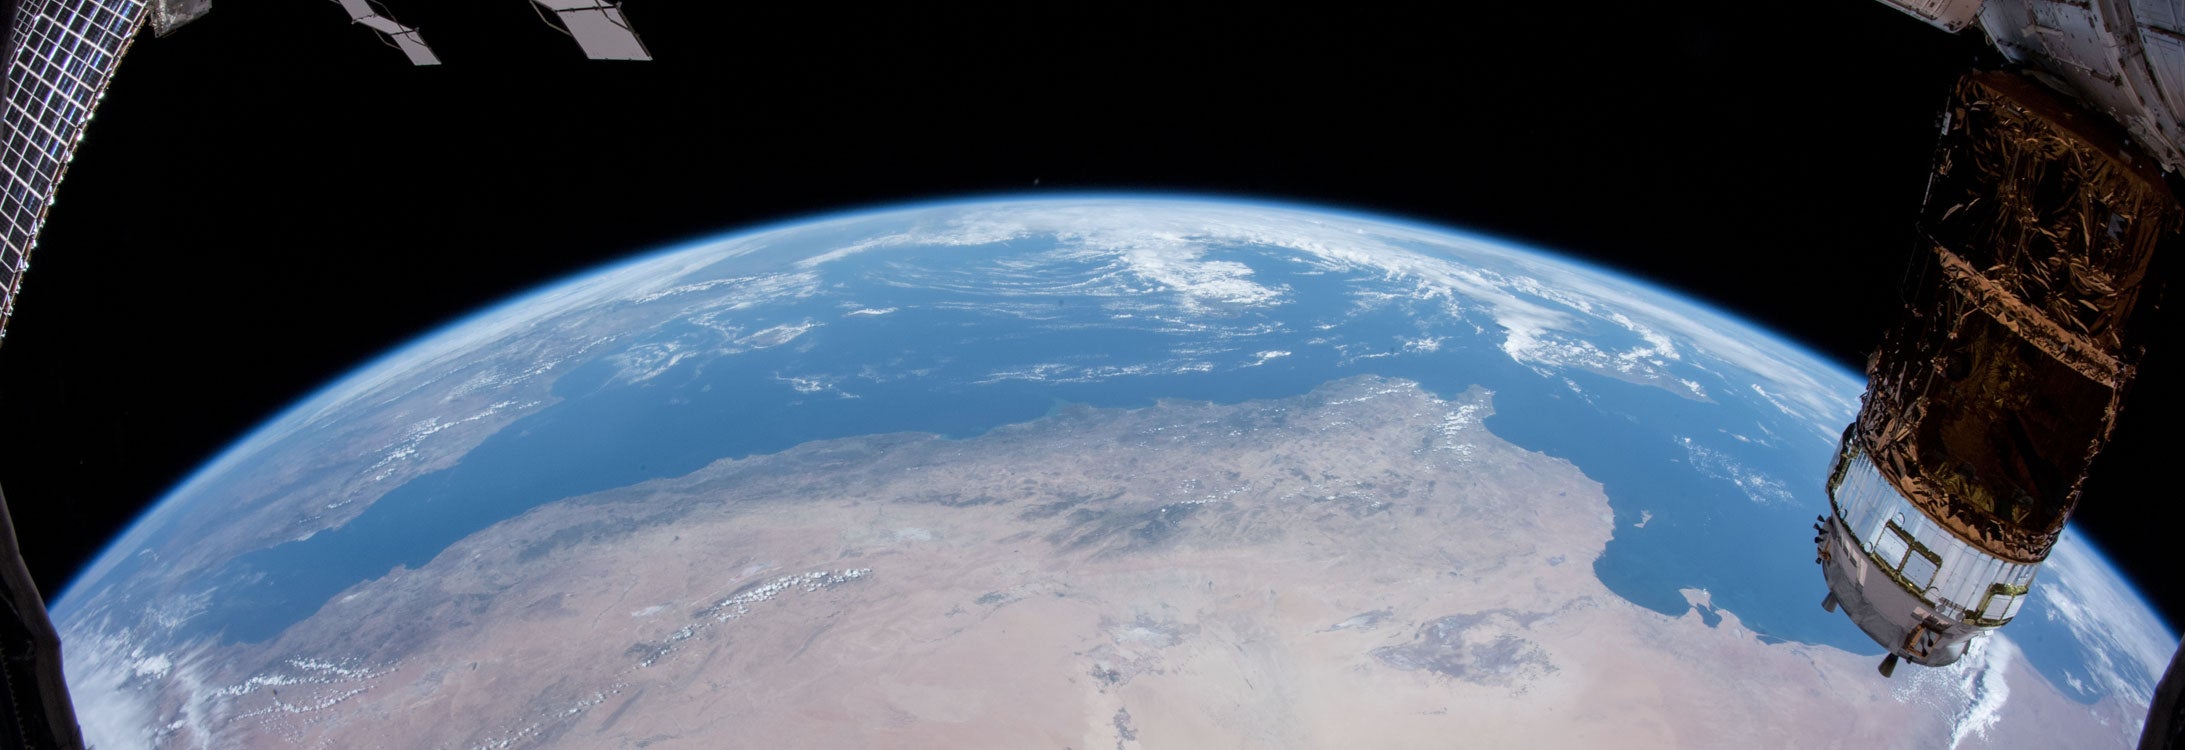 ss057e000244 (Oct. 6, 2018) --- A image captured from a time-lapse imagery sequence shows north Africa and the Mediterranean Sea as the International Space Station orbited 254 miles above the African continent. Japan's Kounotori H-II Transfer Vehicle-7 (HTV-7) is pictured at left attached to the Harmony module. Portions of the station's solar arrays and radiators are pictured at left.